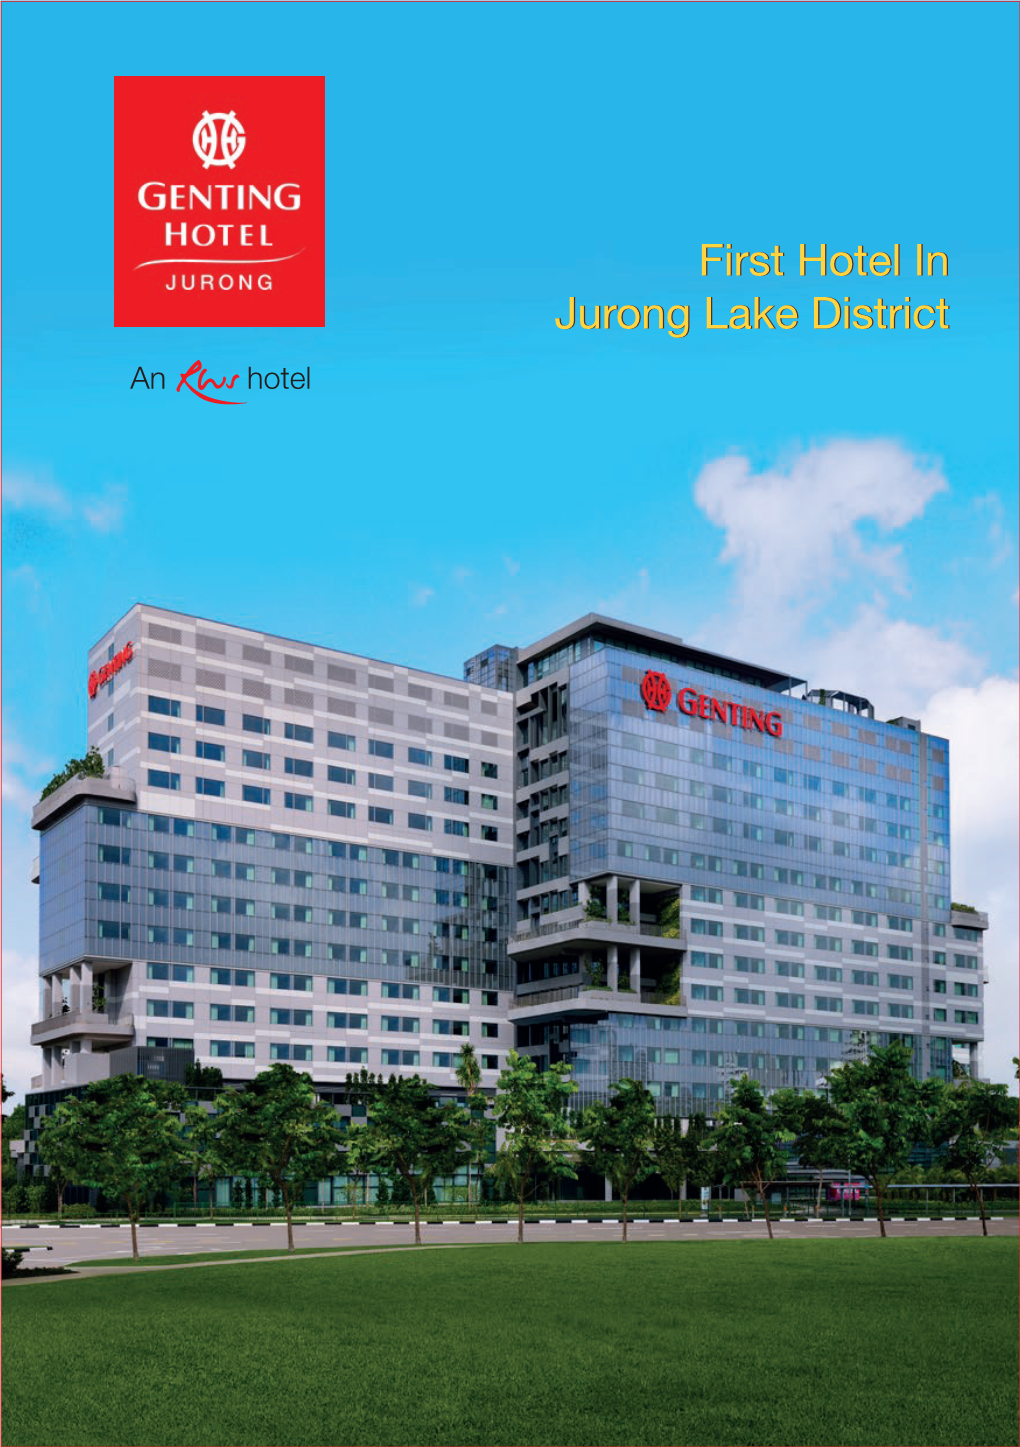 First Hotel in Jurong Lake District